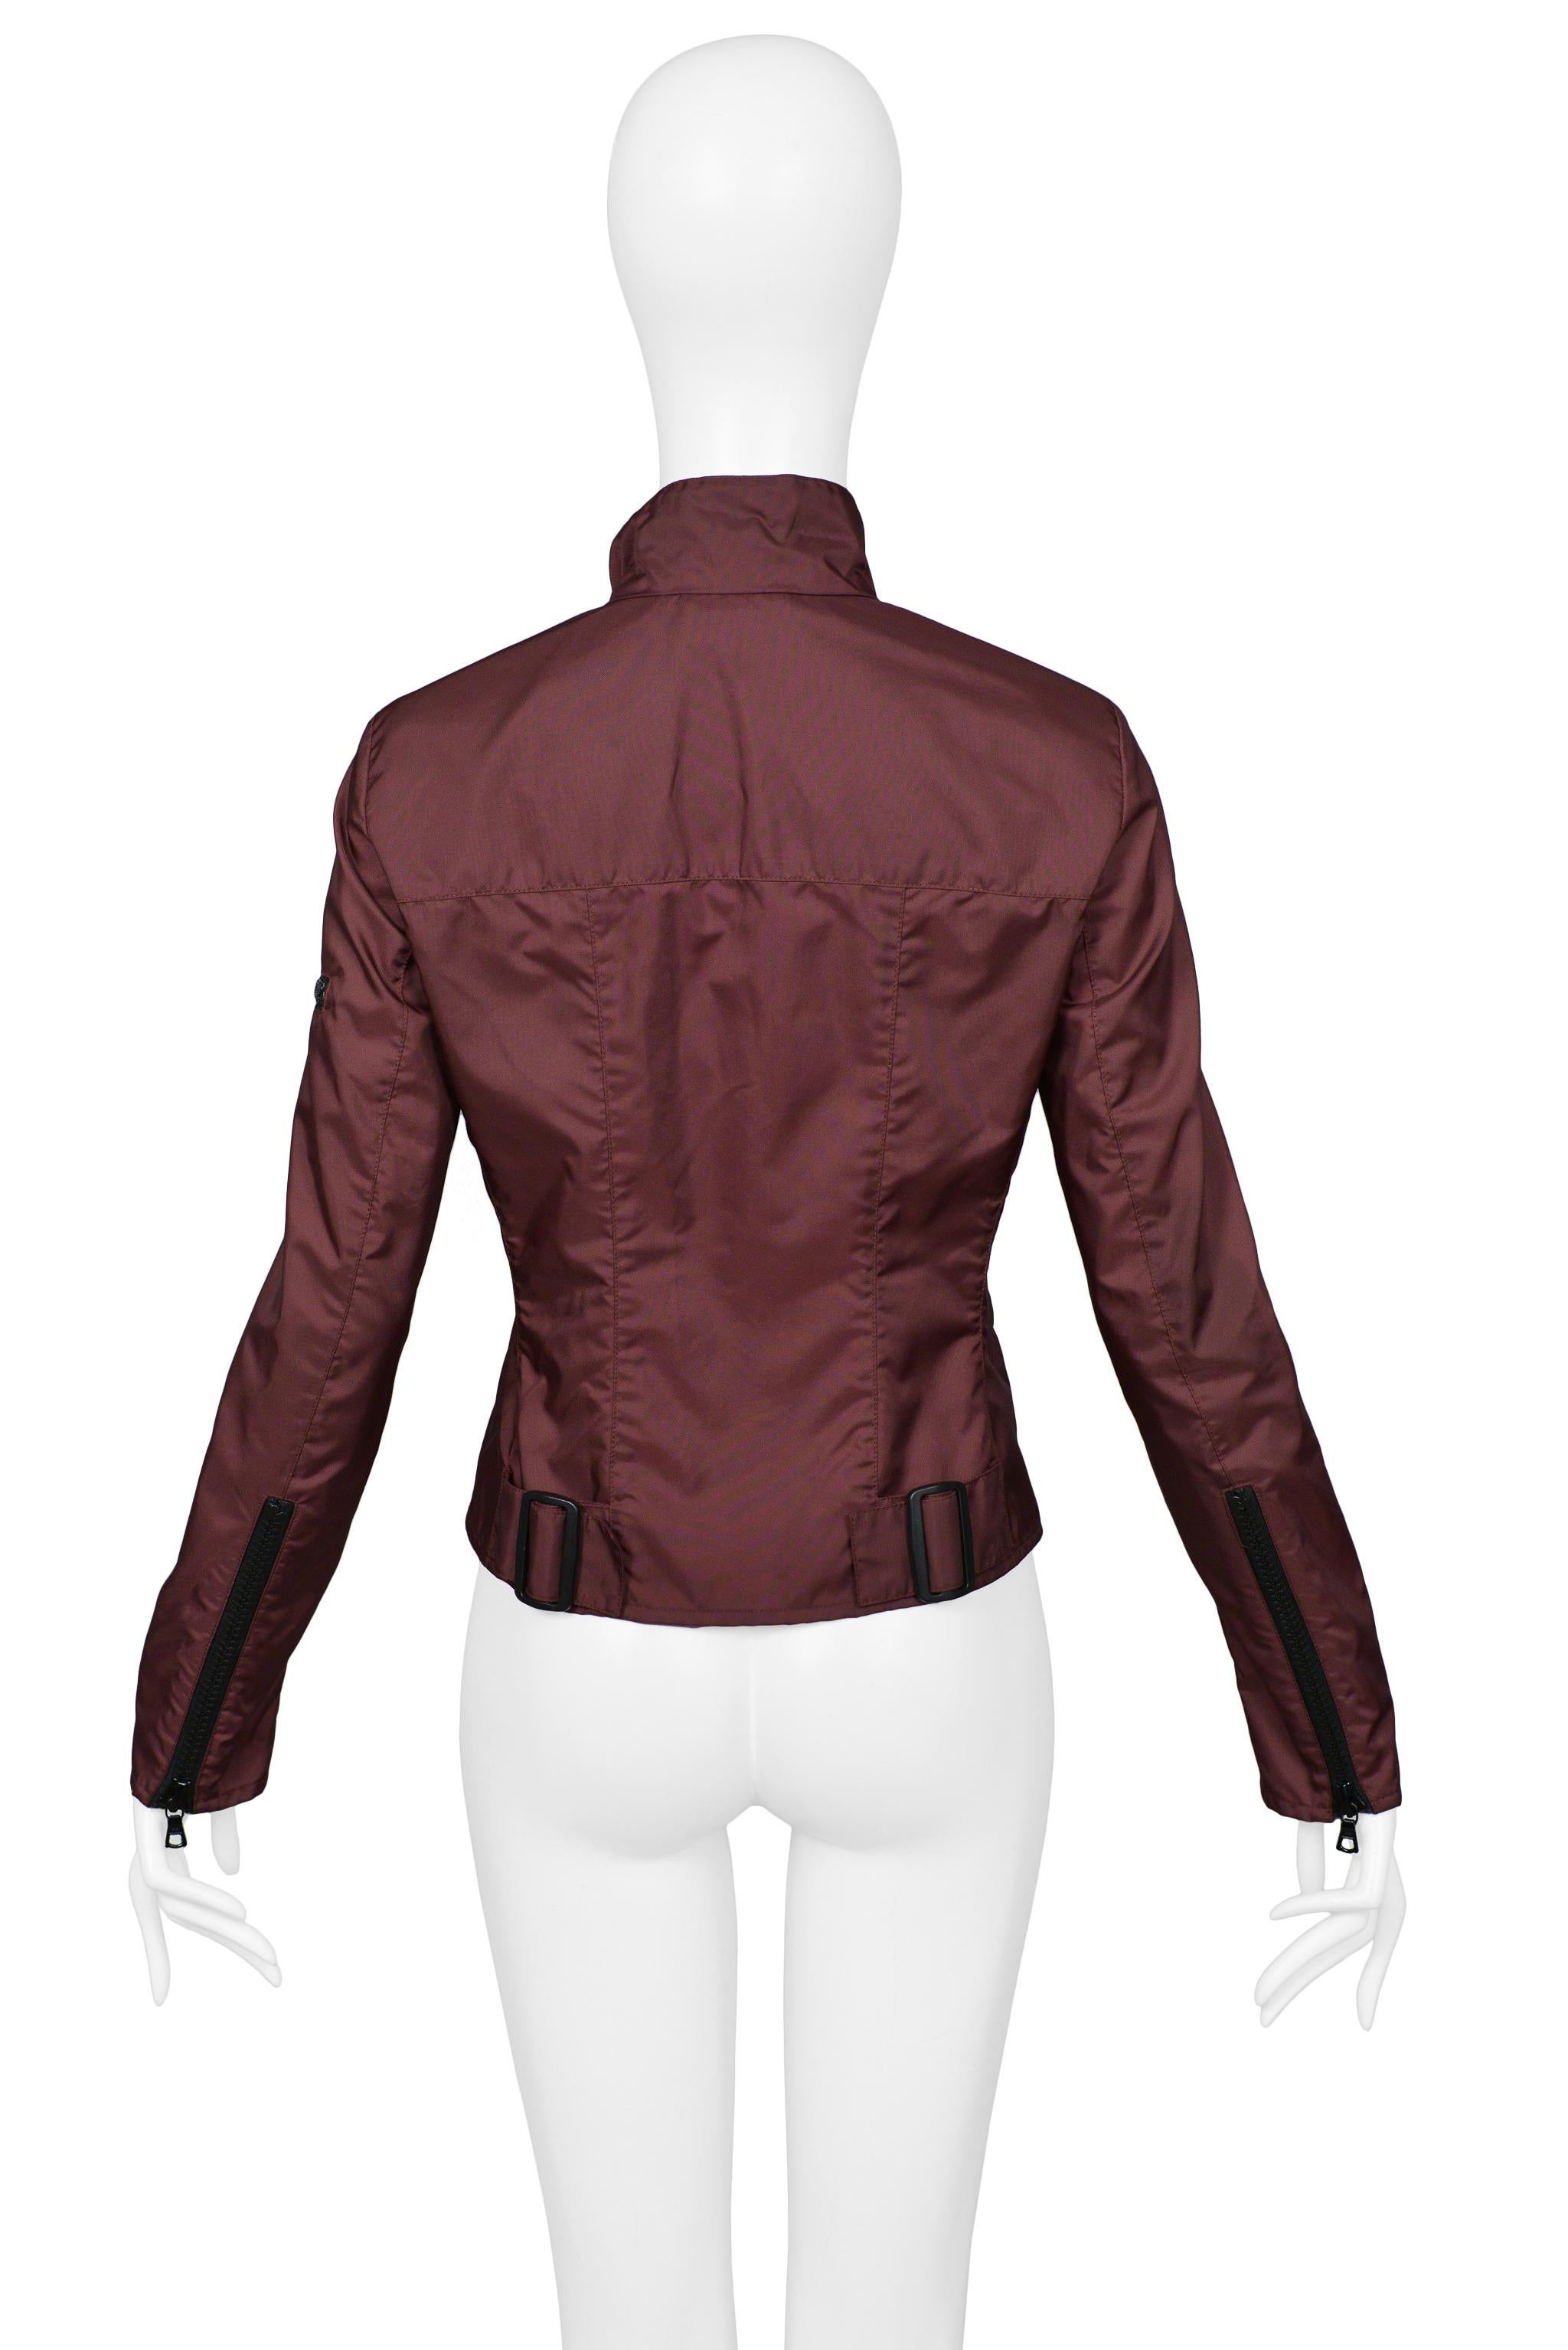 Miu Miu Burgundy Asymmetrical Zipper Jacket In Excellent Condition For Sale In Los Angeles, CA